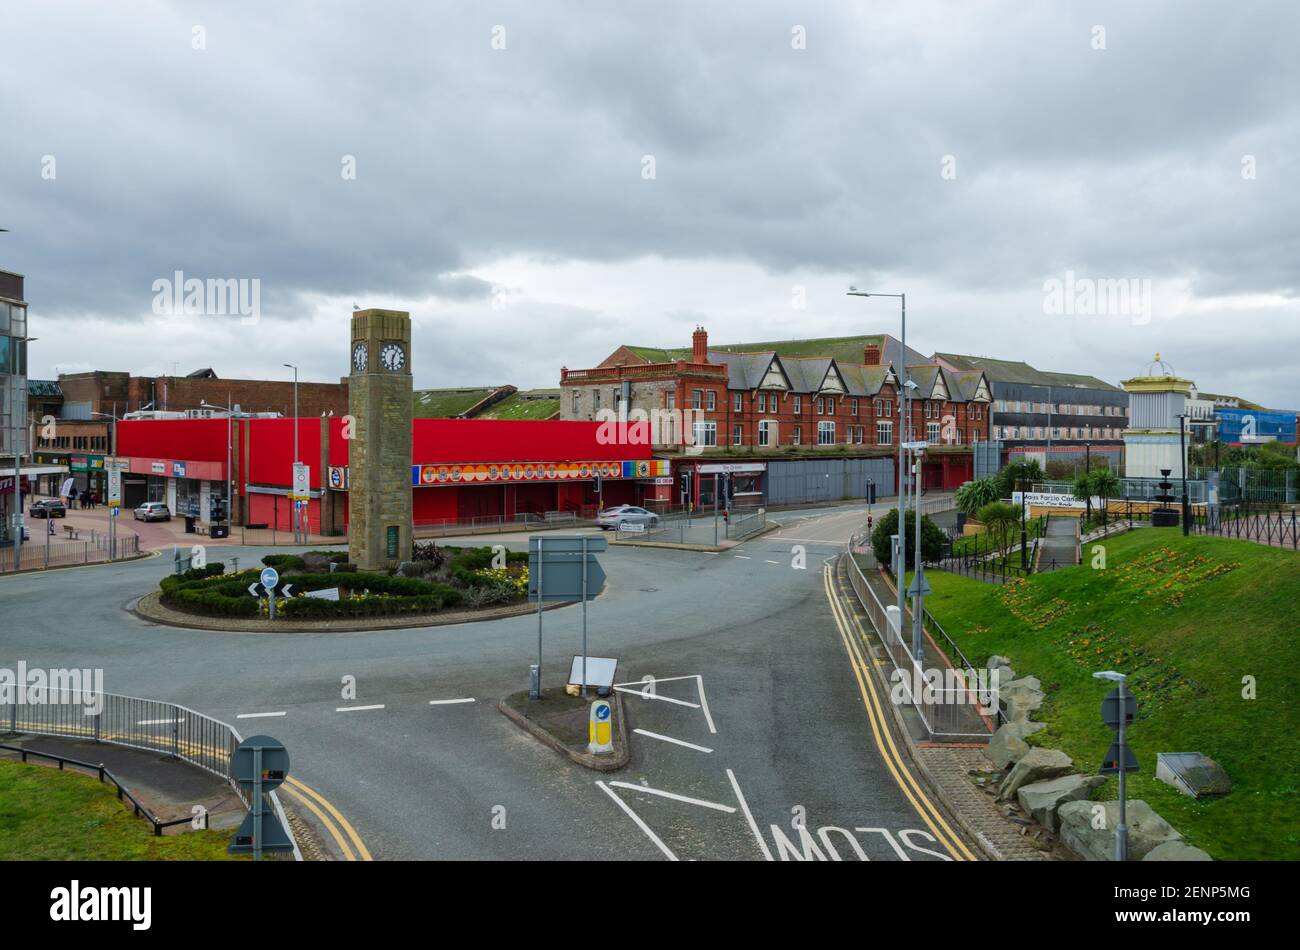 Rhyl, Denbighshire; UK: Feb 21, 2021: A general street scene showing  the clock tower roundabout with the soon to be demolished and redeveloped Queens Stock Photo